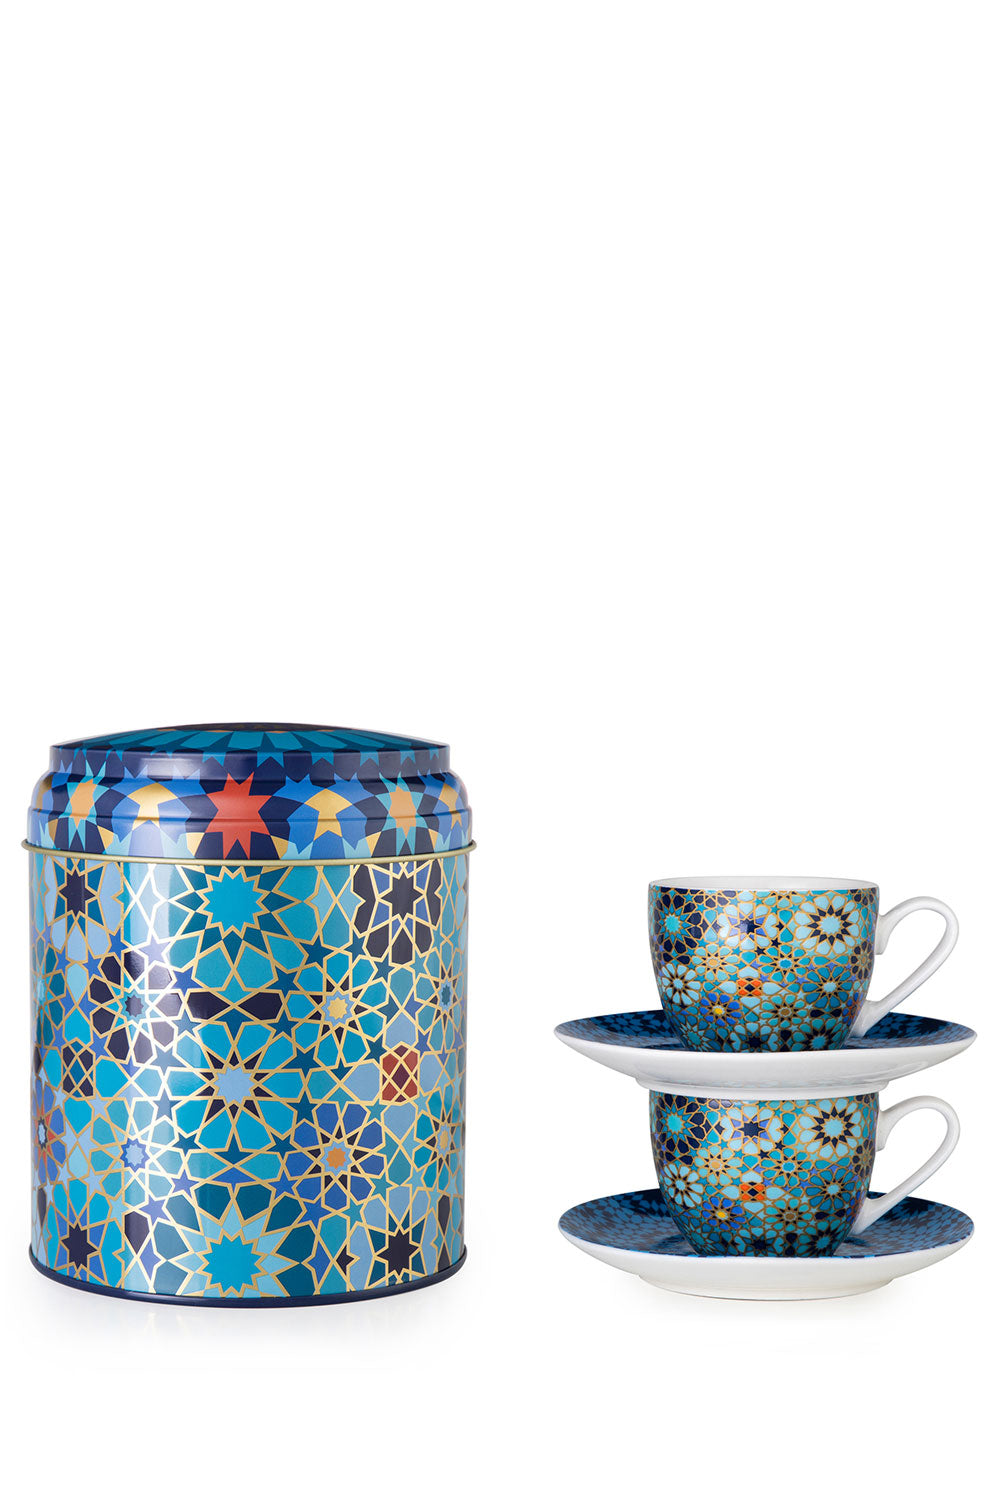 Moucharabieh Tin box with 2 cups and Saucer